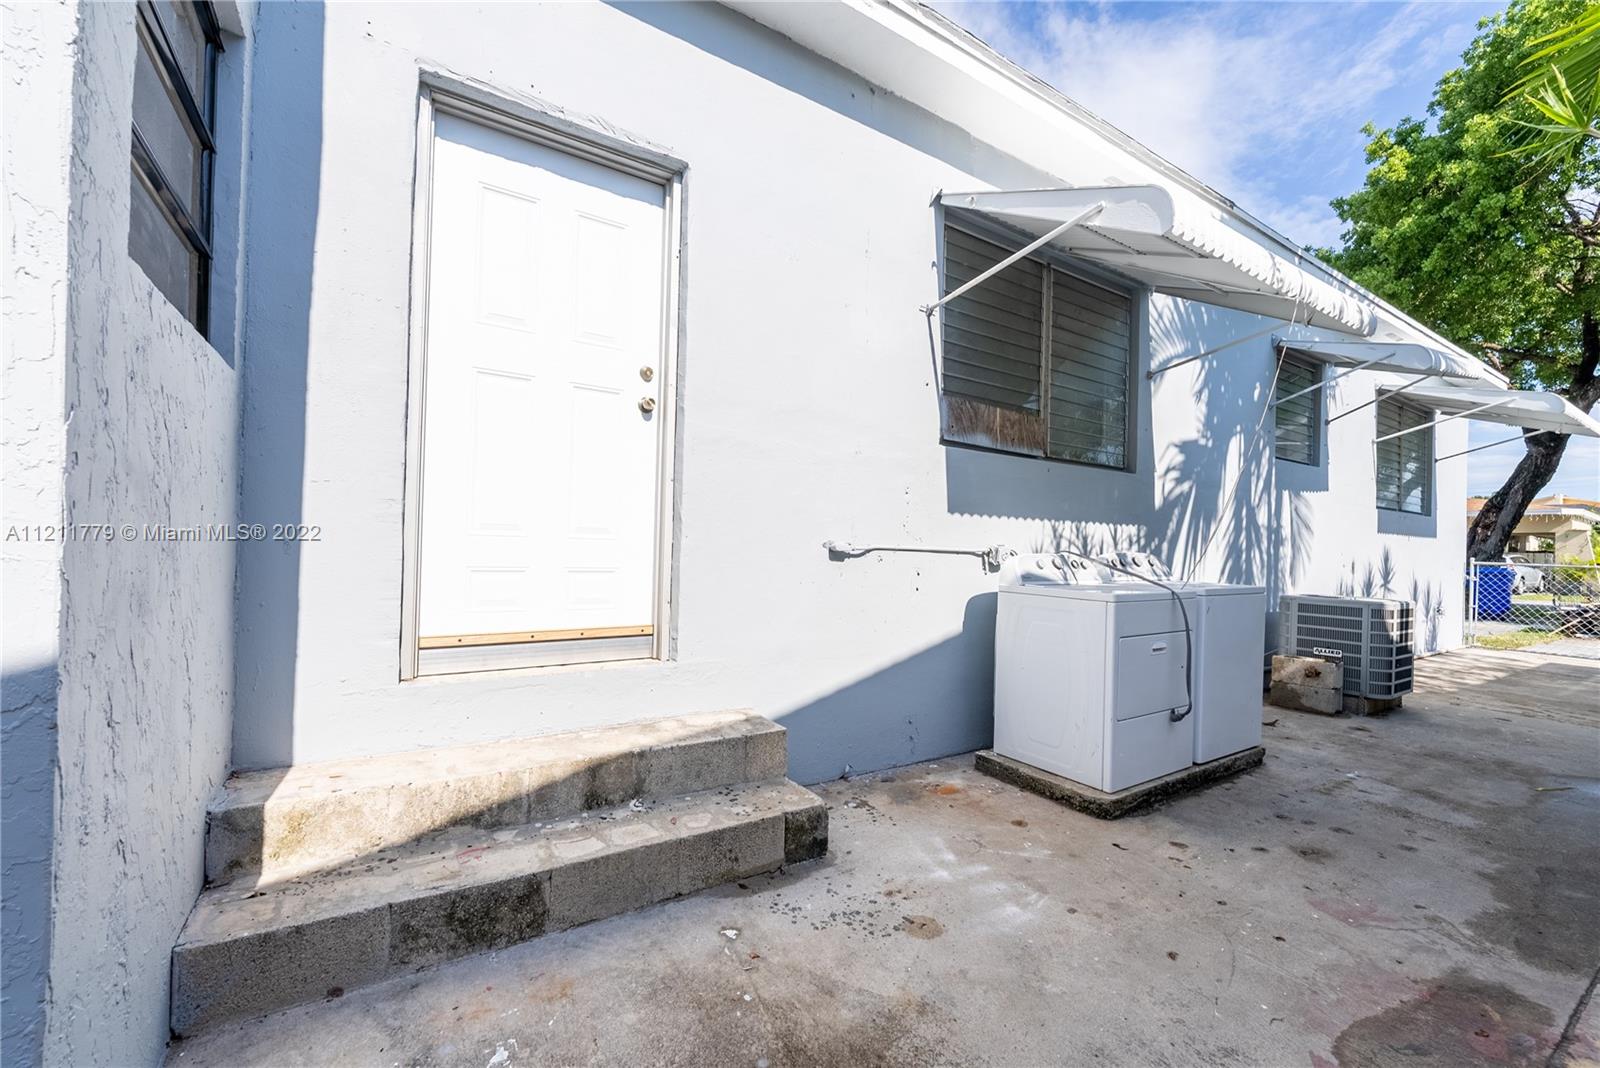 Location, location, location, less than 5 minutes away from Coral Gables Miracle Mile, Coral Gables Hospital, 15 minutes away from Brickell and Downtown Miami. The property has been renovated, brand new roof, new electrical, fresh paint, large bedrooms